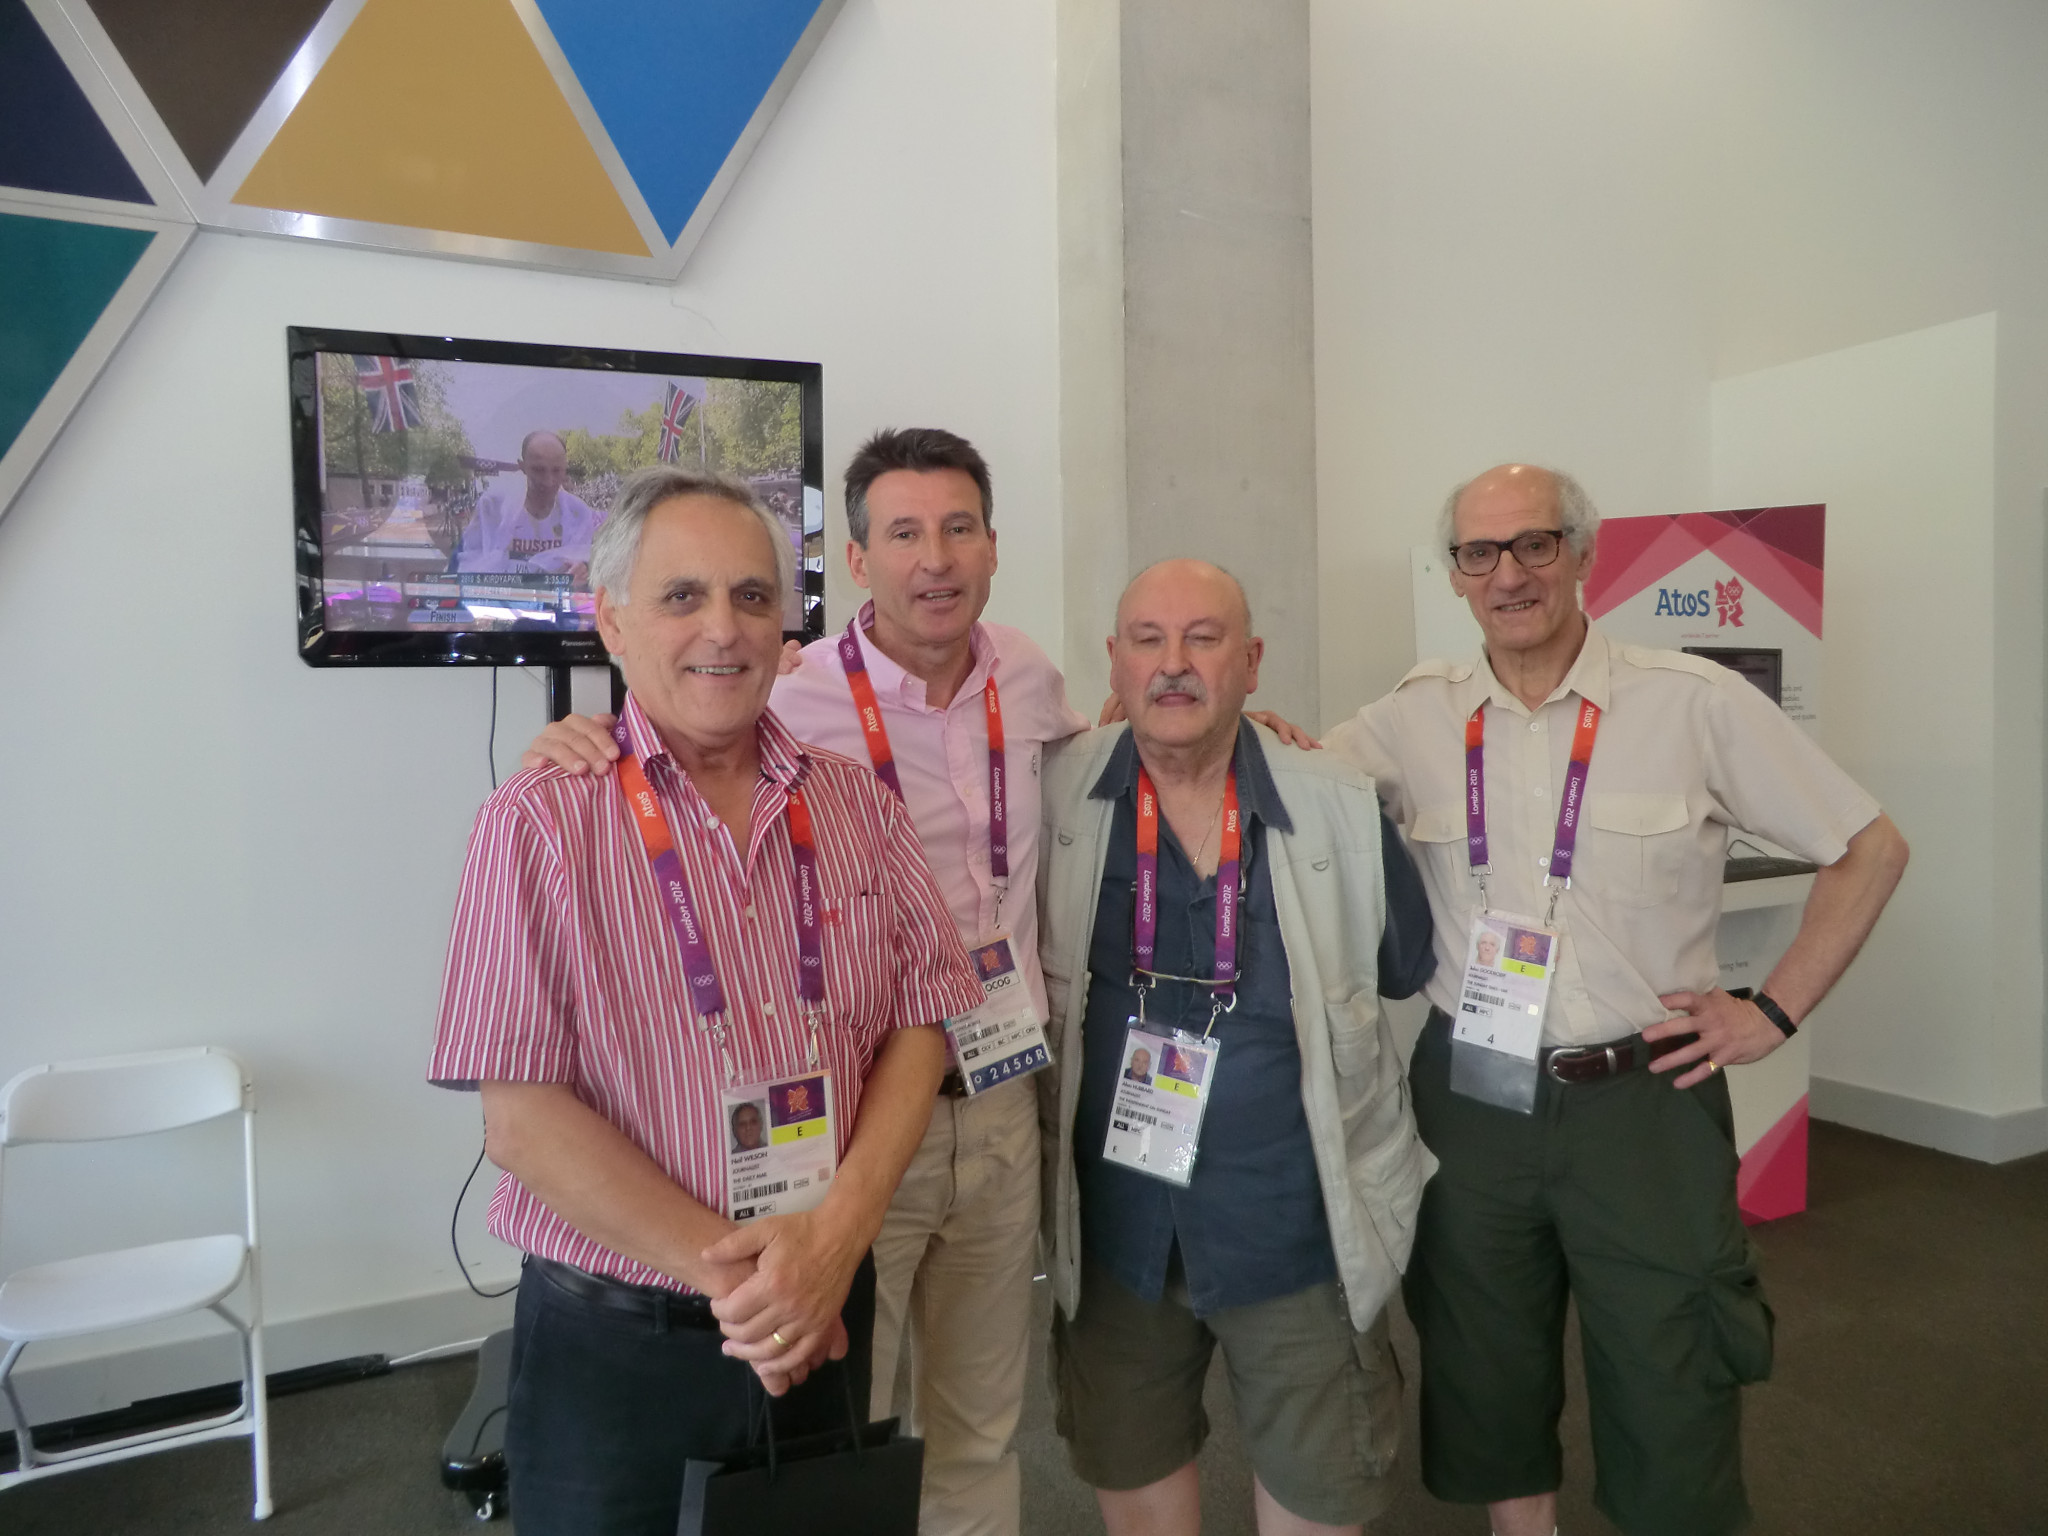 At the 2012 Olympics in London, Alan Hubbard, second from right, was joined by Neil Wilson, Sebastian Coe and John Goodbody to celebrate almost a lifetime reporting Olympic sport ©ITG